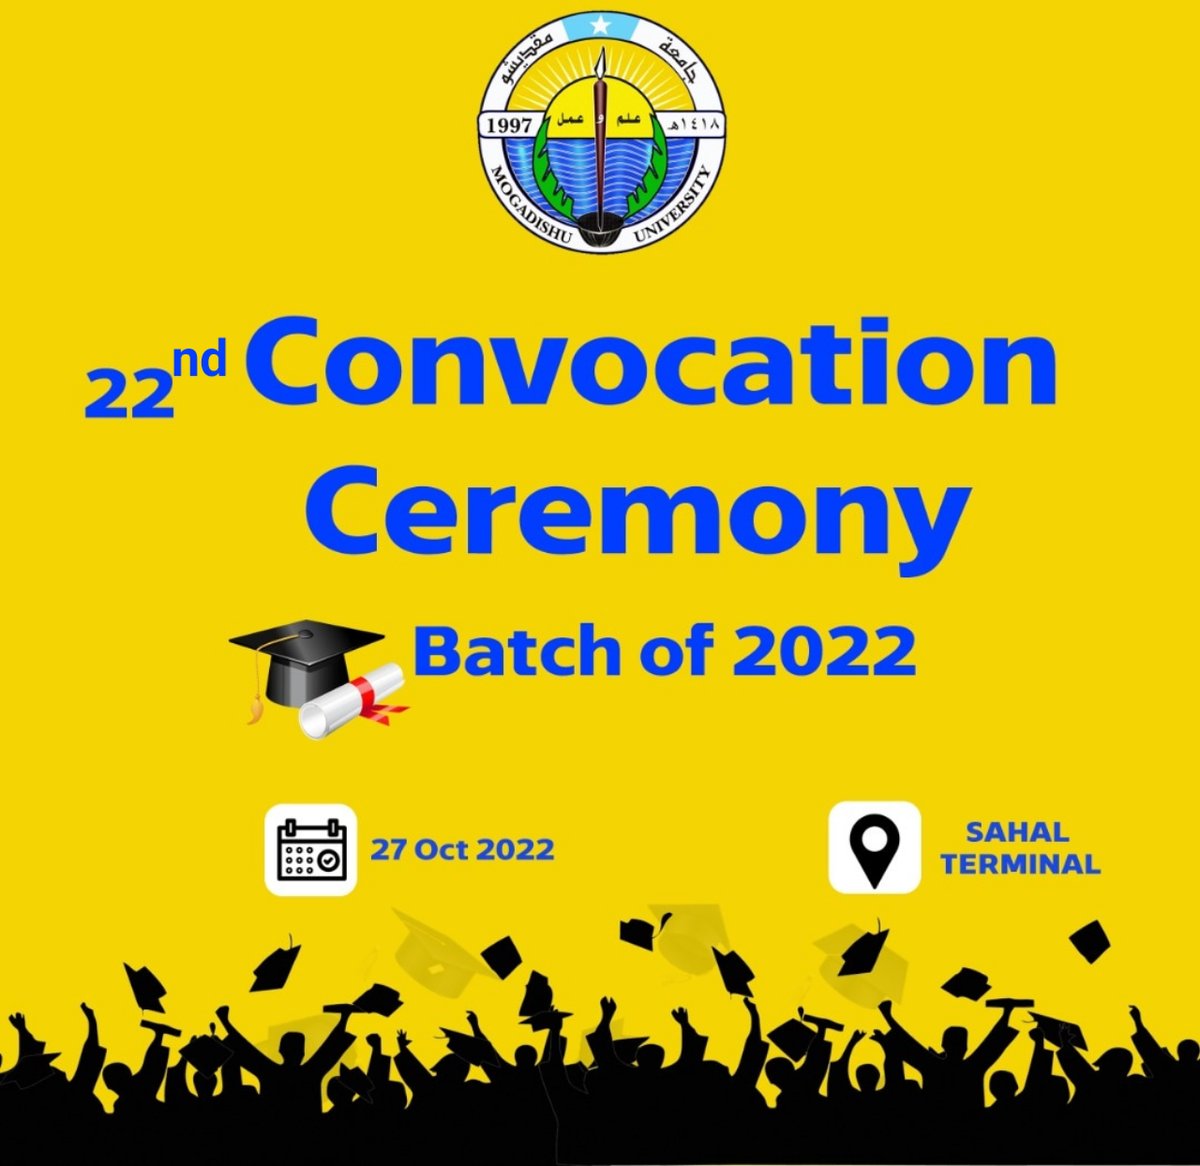 22nd Graduation Ceremony is coming up on October 27, 2022 Dear graduates, Please be prepared for that big day. #MUgraduation #MUBatch2022.